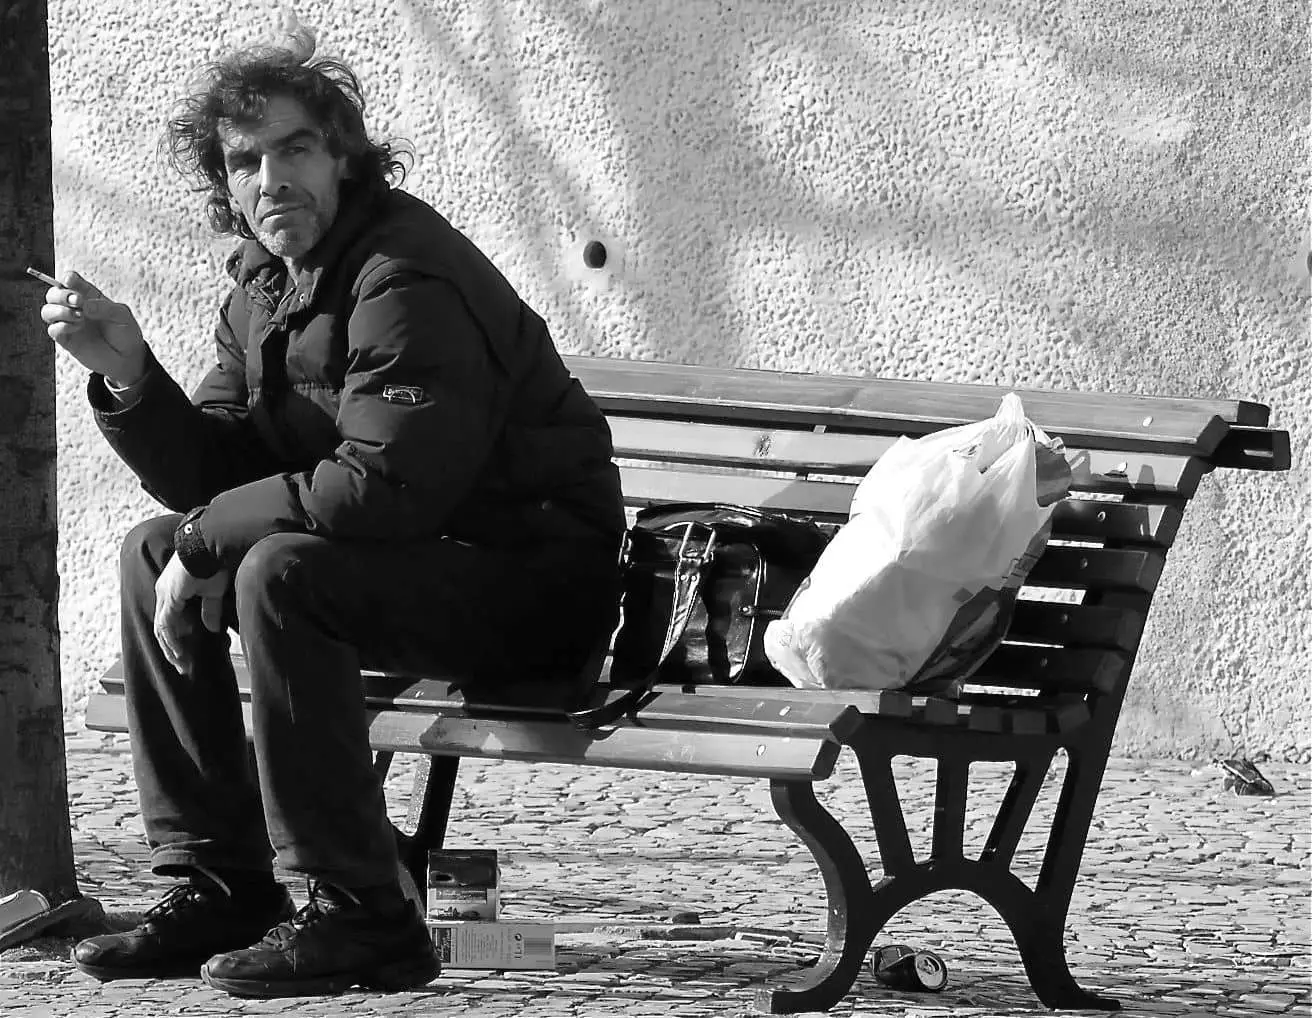 rough sleeper on a bench with a cigarette